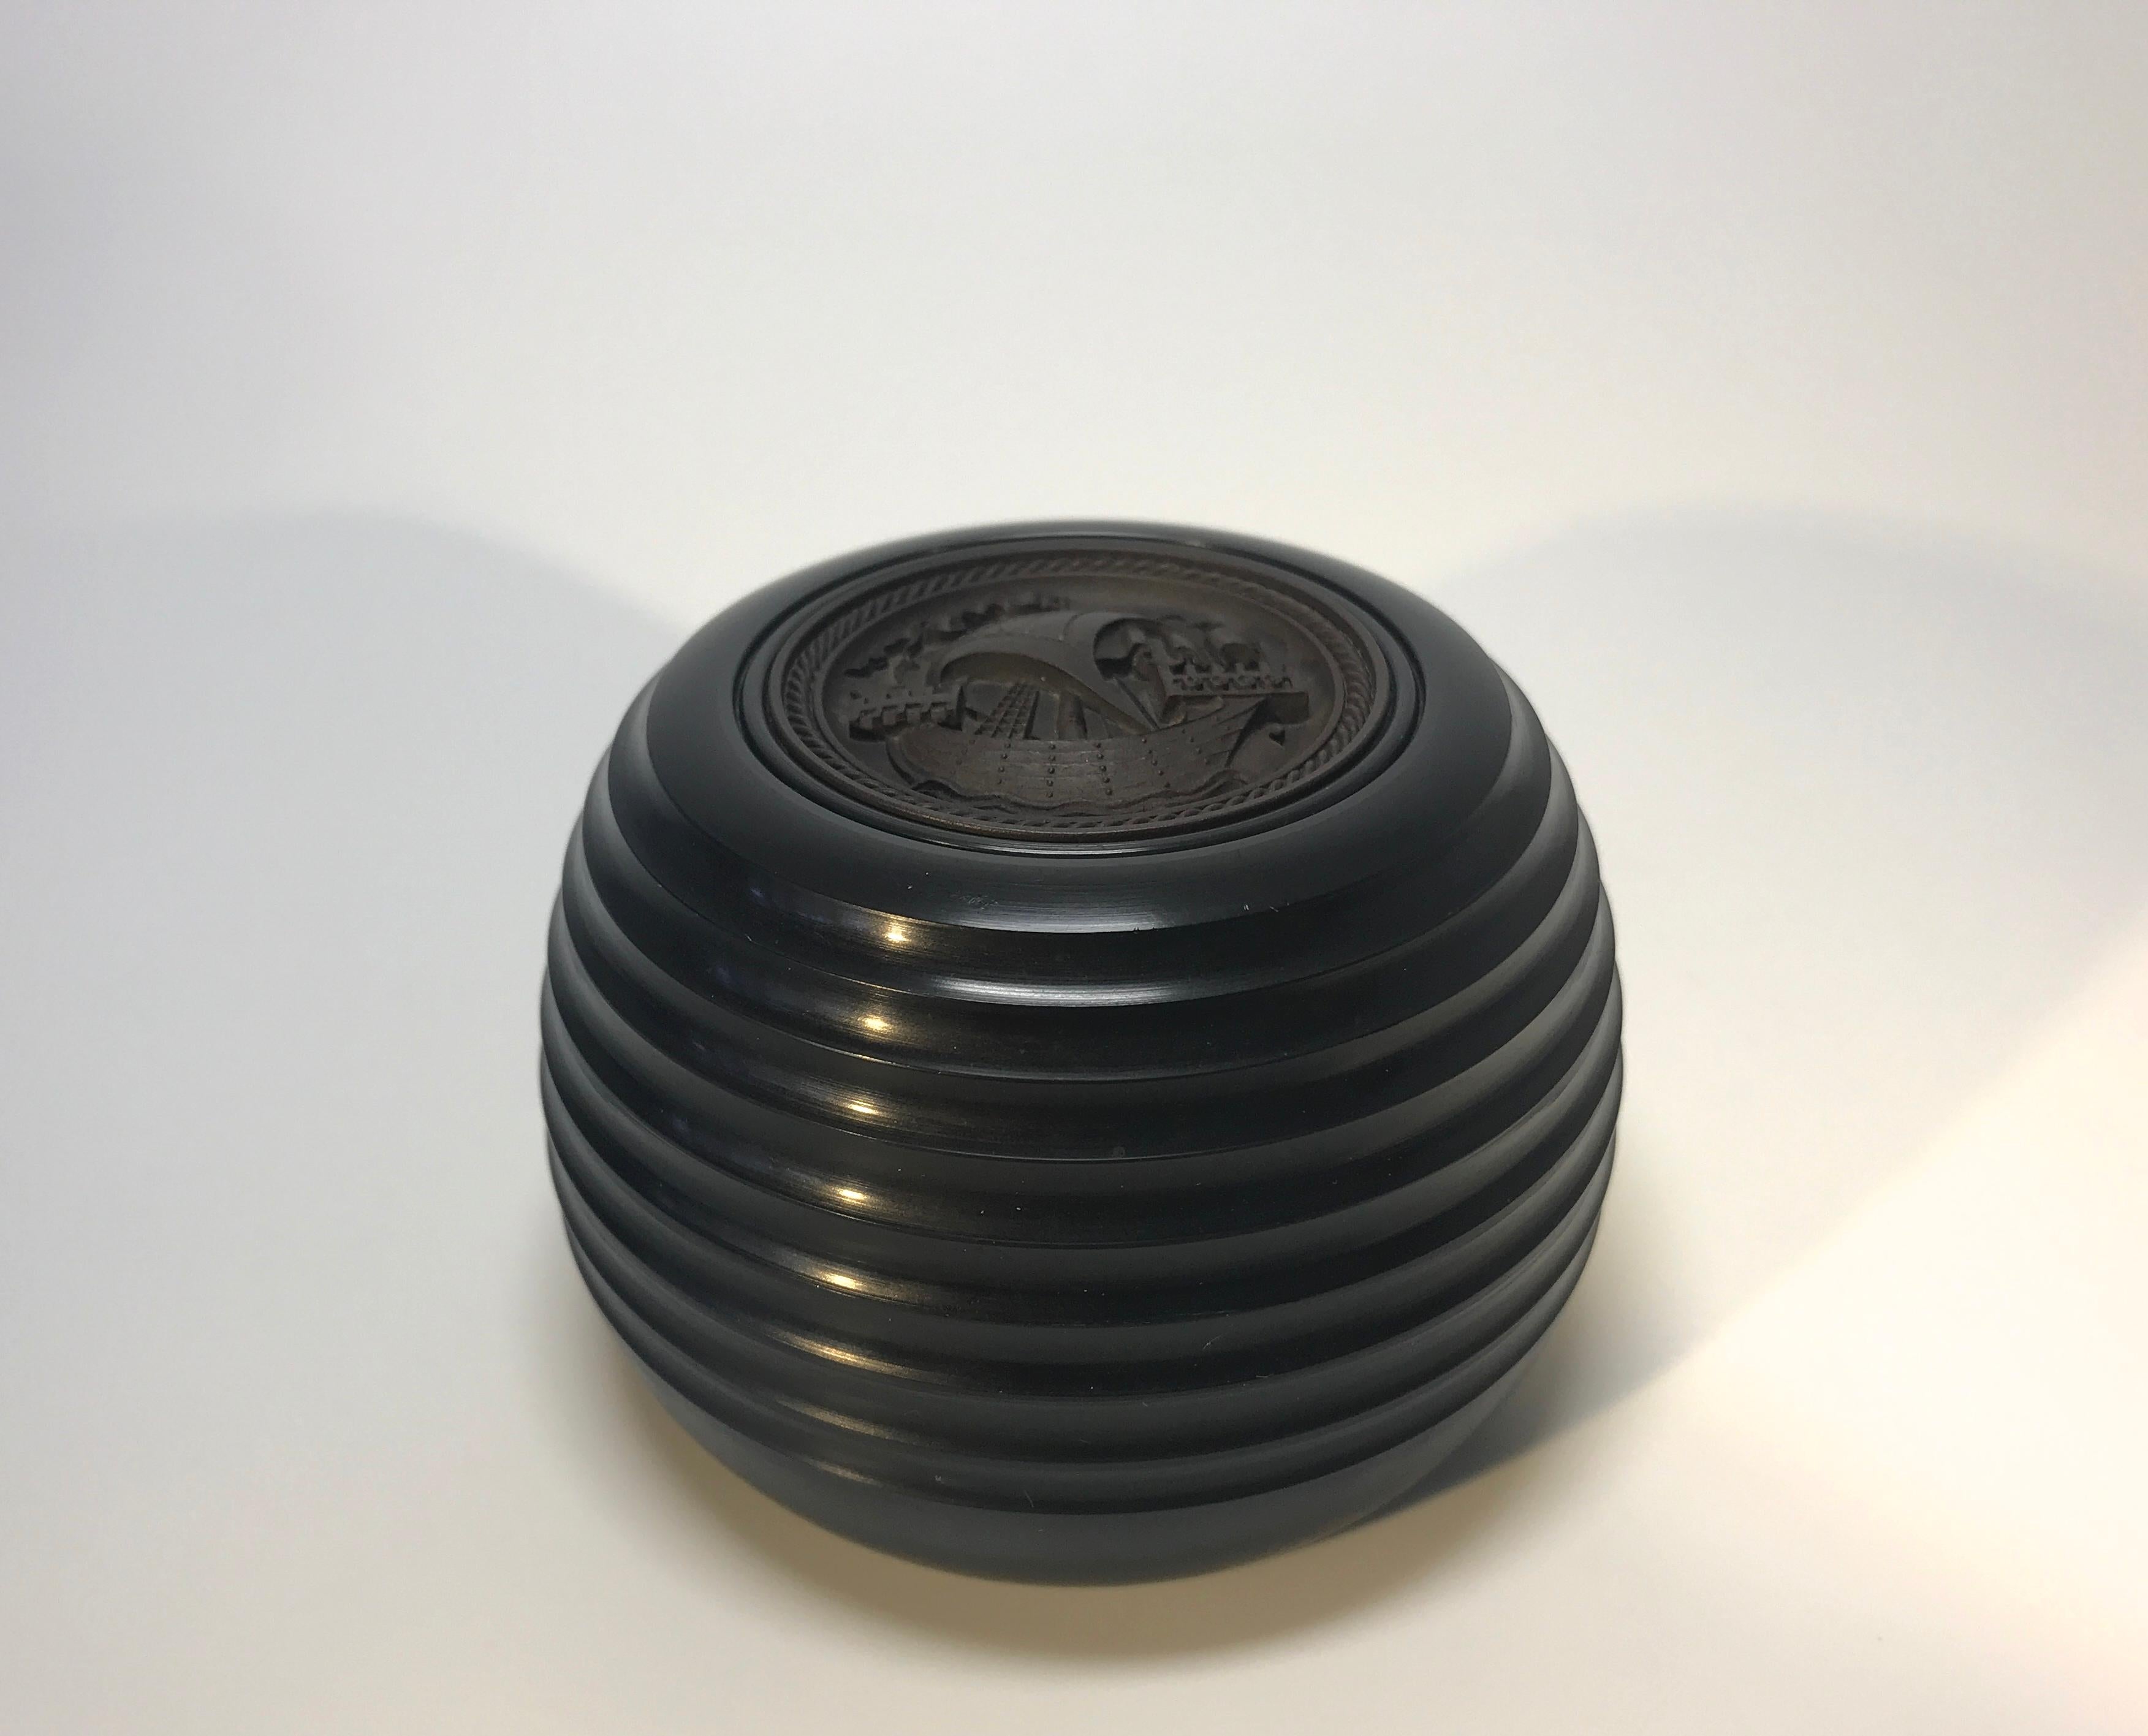 Superb cameo of an ancient sailing ship, inset on a heavy black polymer beehive shaped turned base
Inset underneath is a magnetic disc for paperclips
Retro maritime desk accessory,
circa mid-20th century
Measures: Height 2 inch, diameter 3